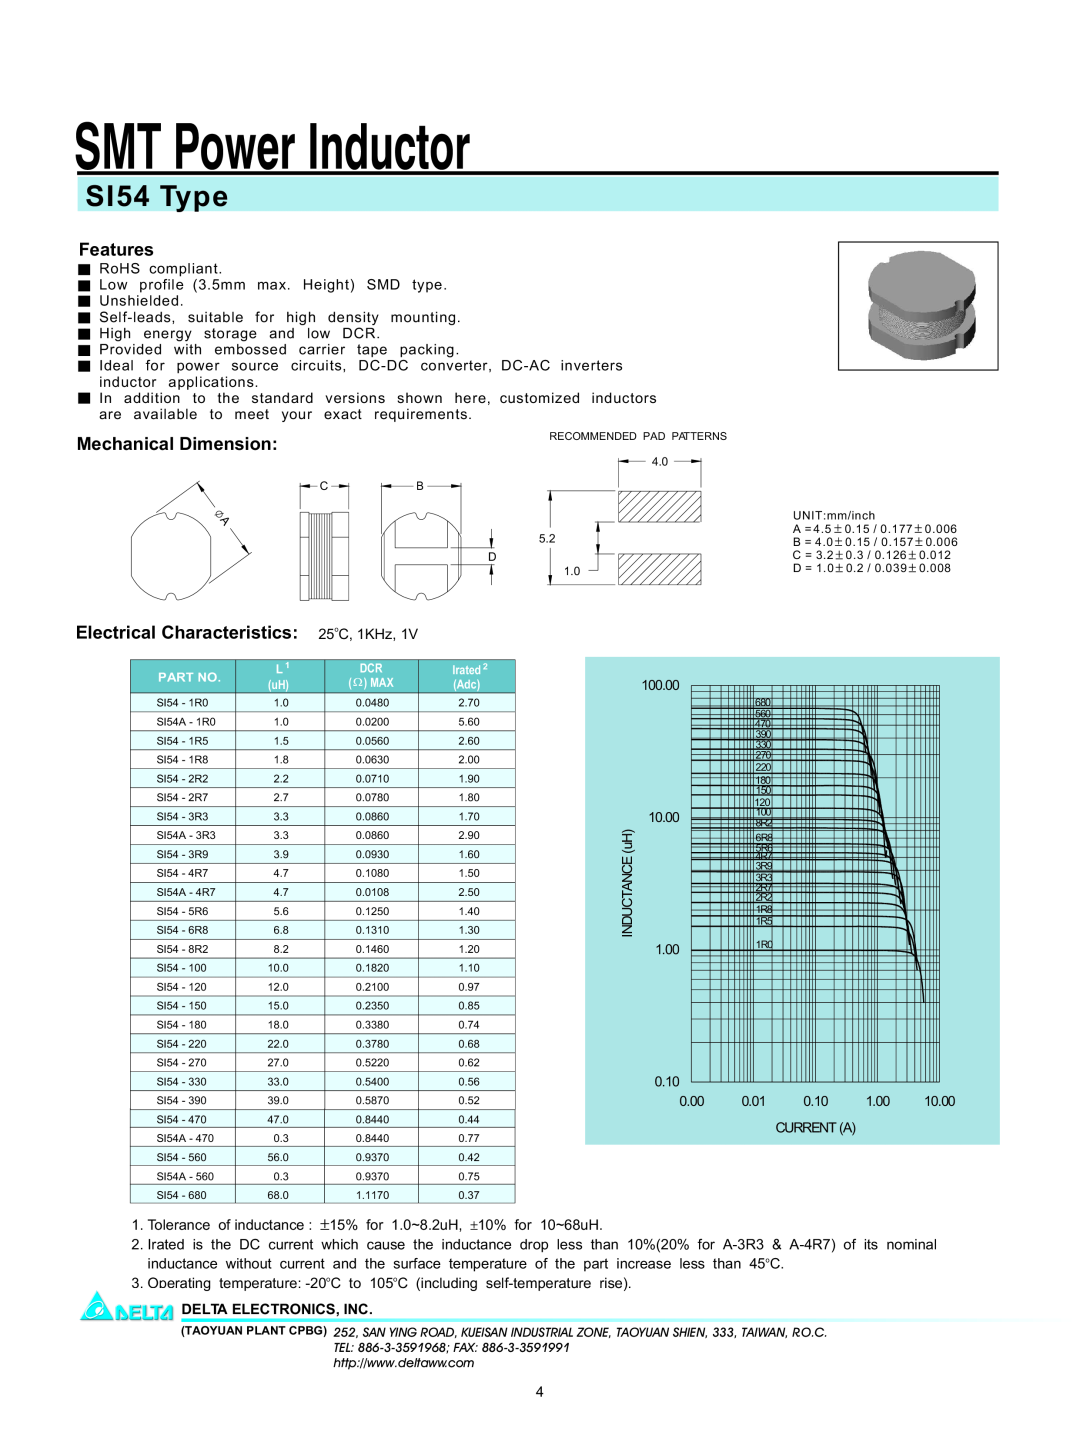 Delta Electronics manual SMT Power Inductor, SI54 Type, Features, Mechanical Dimension, Electrical Characteristics 